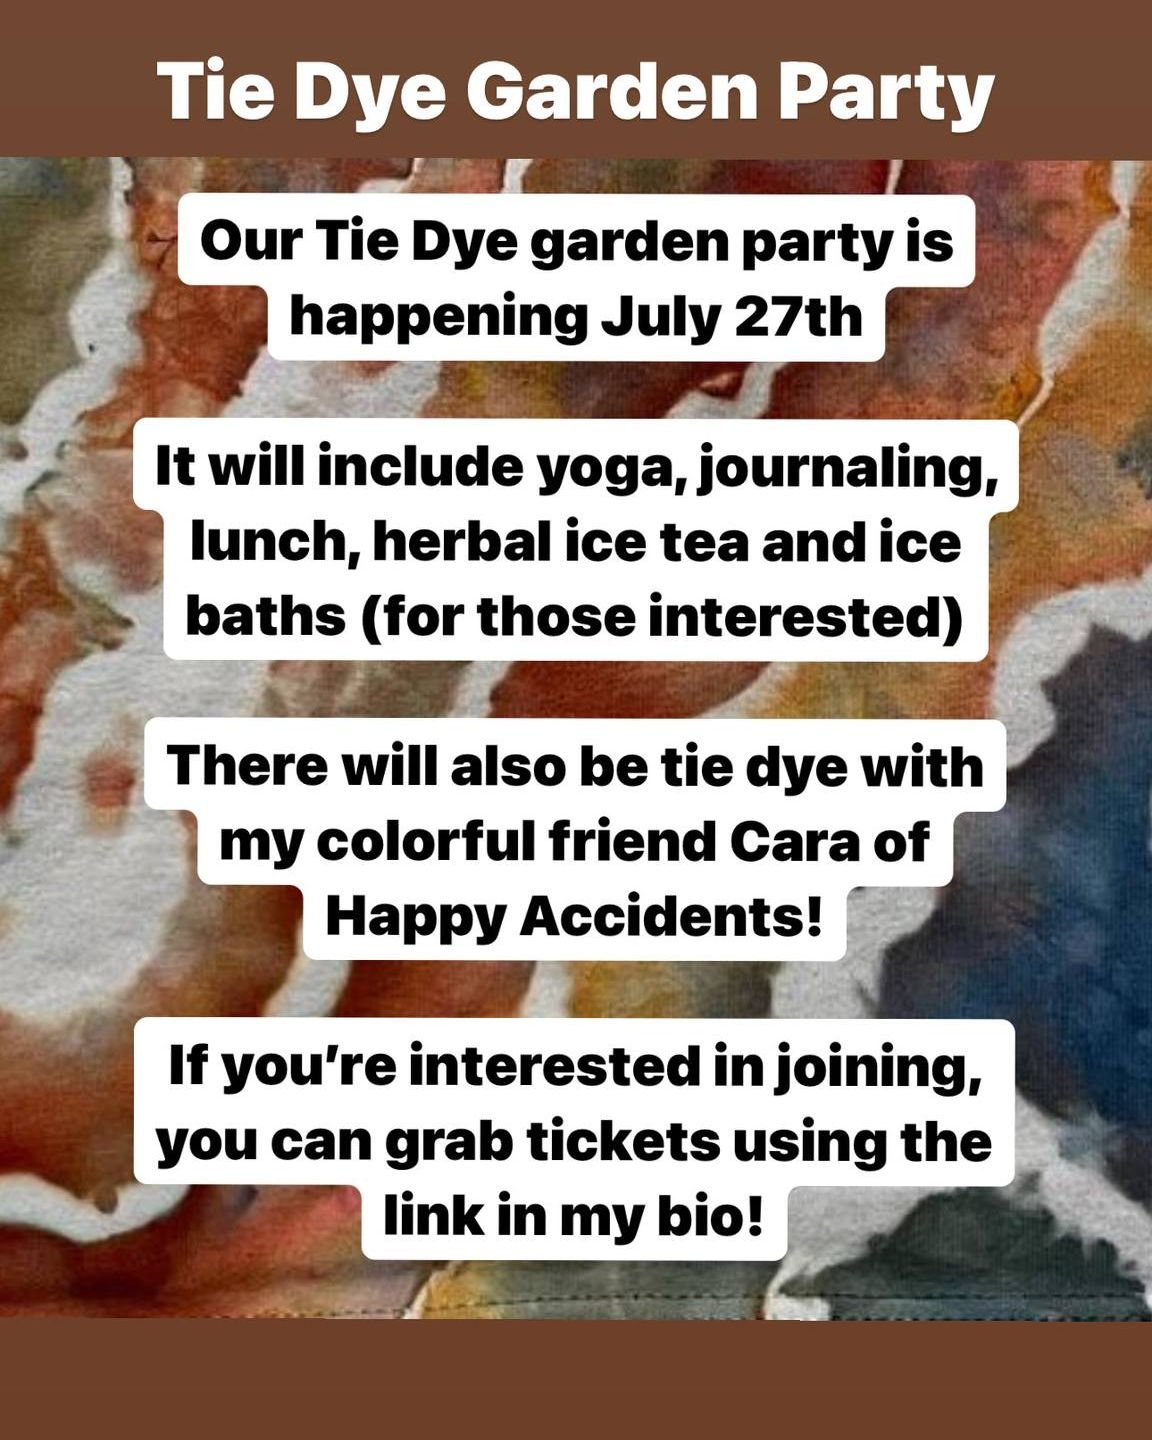 ❤️🧡💛Tie Dye Garden Party- July 27th💚💙💜

Our June garden party is full, but there are still a few spots left for the July garden party! We will enjoy some yoga, journaling, lunch and tea, as well as ice baths if you're interested and, of course, 